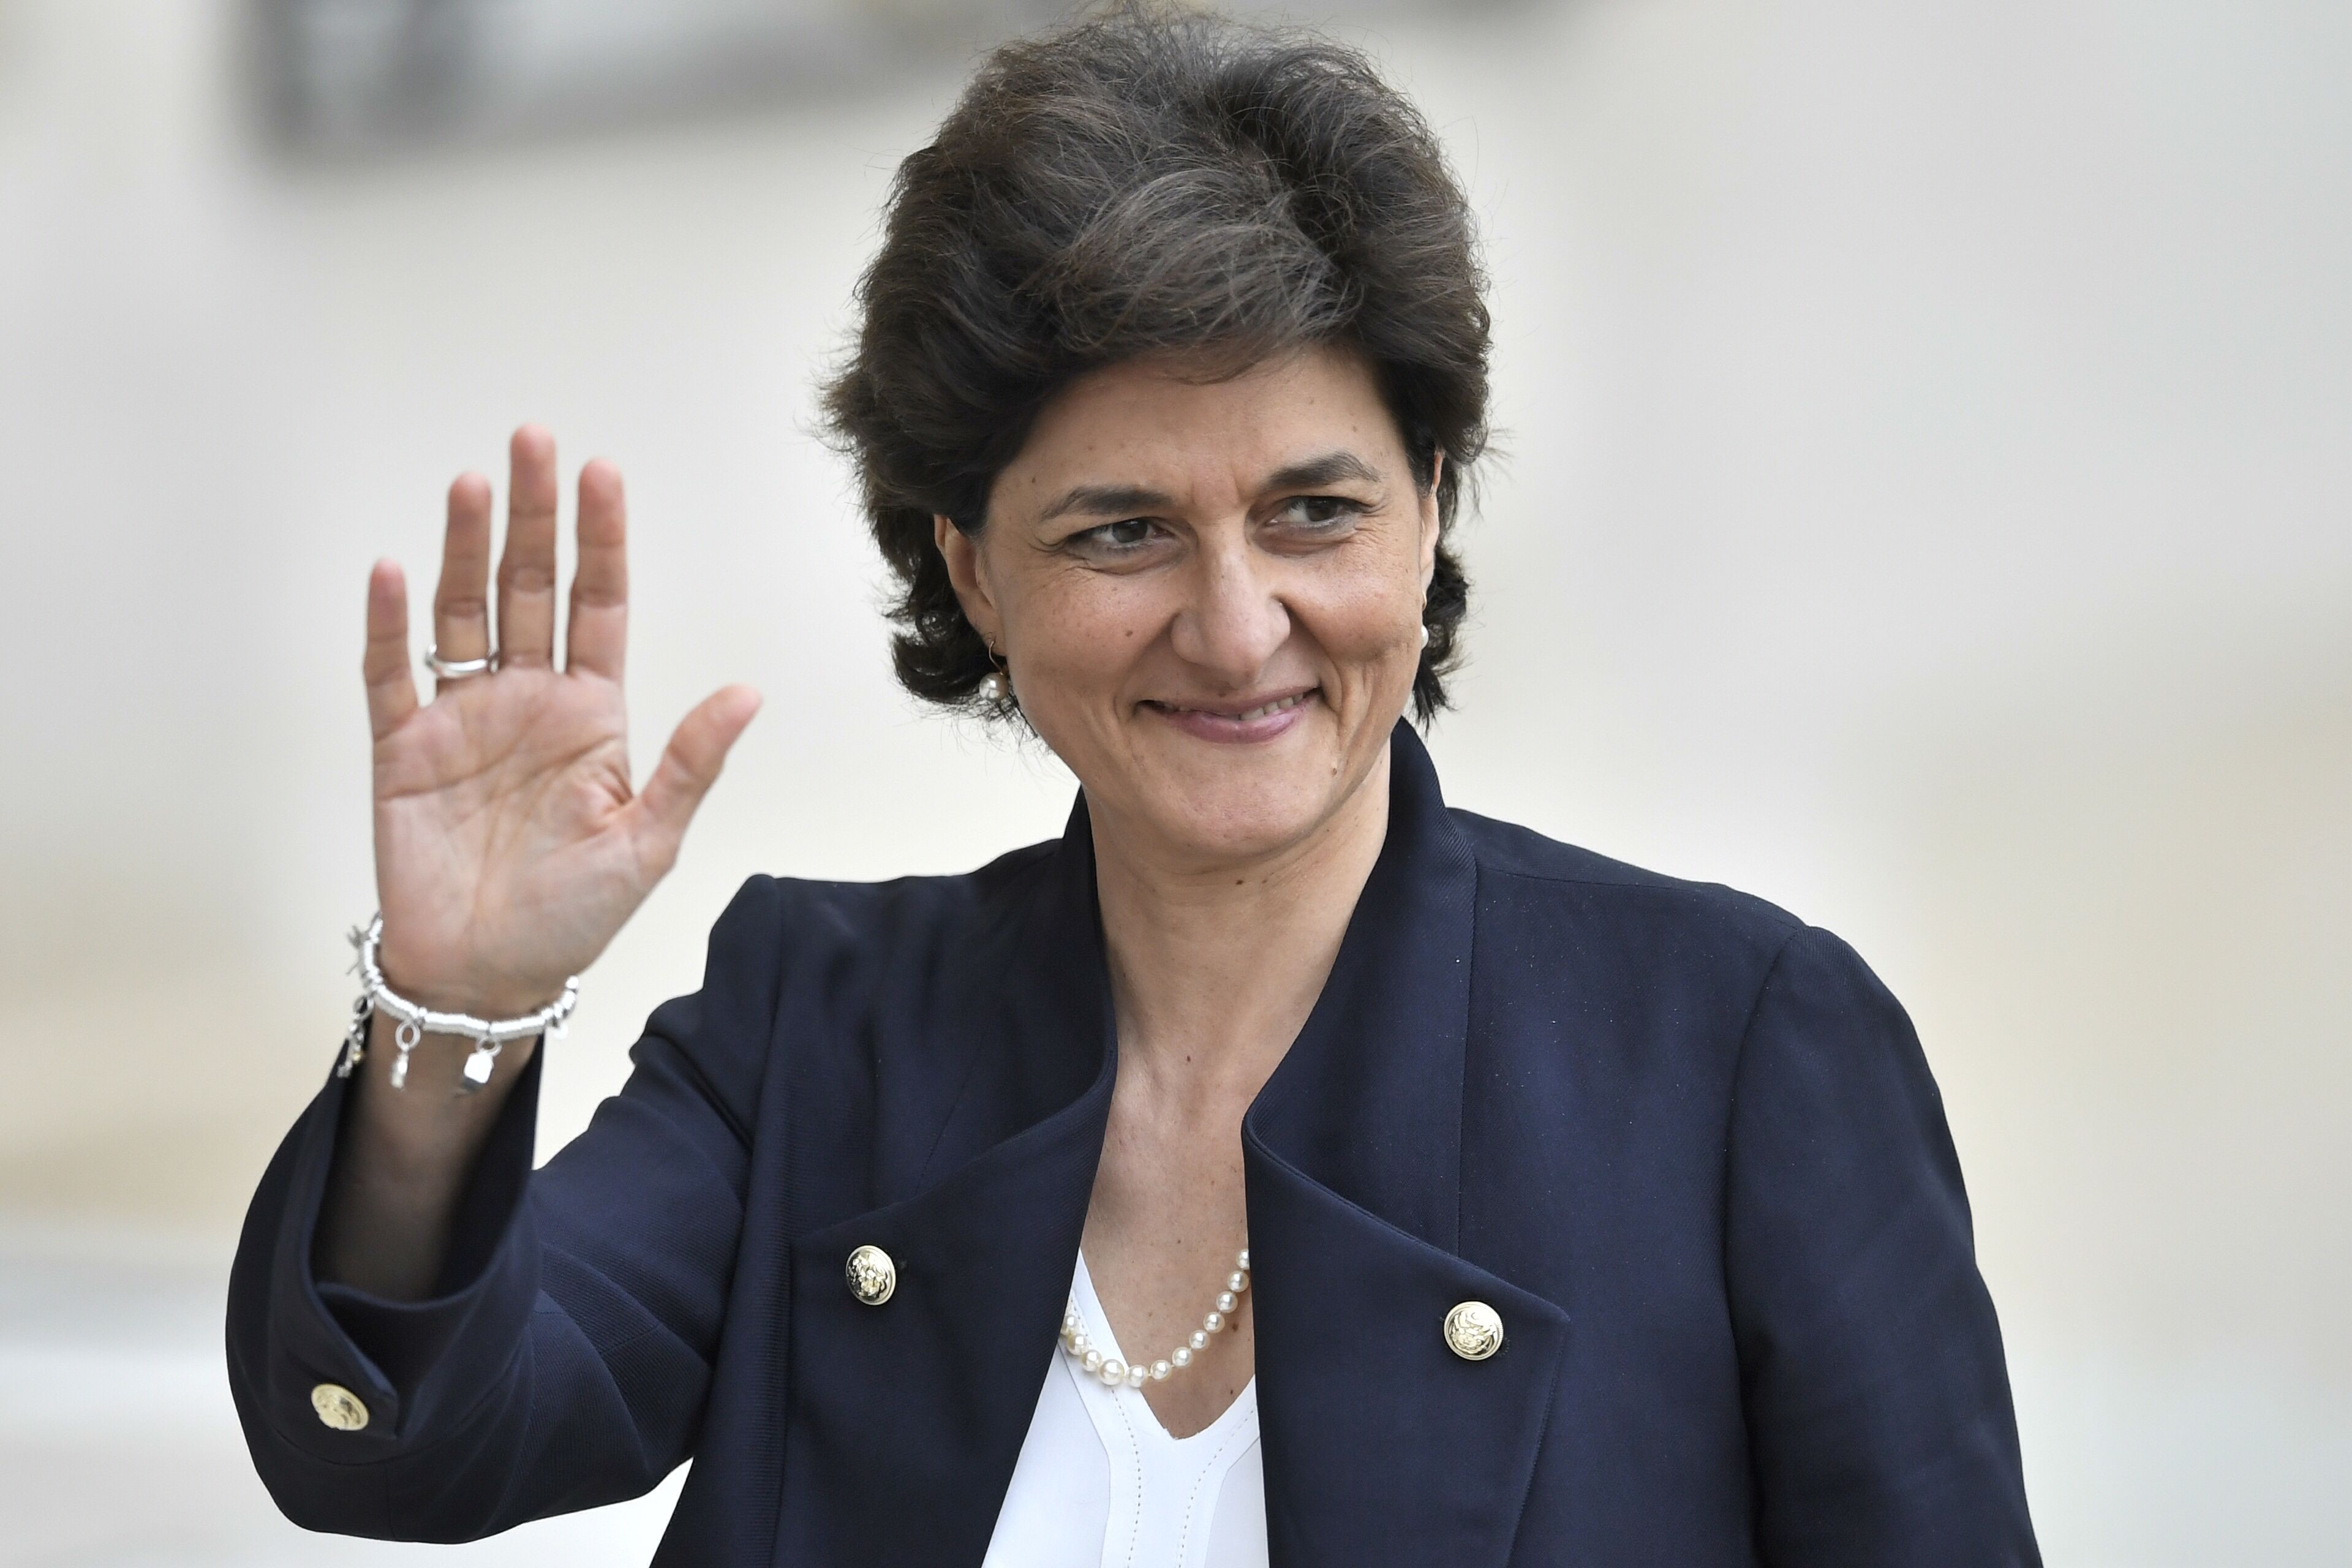 French Minister of Armed Forces Sylvie Goulard arrives at the Elysee palace in Paris on May 18, 2017, before the weekly cabinet meeting. / AFP PHOTO / STEPHANE DE SAKUTIN